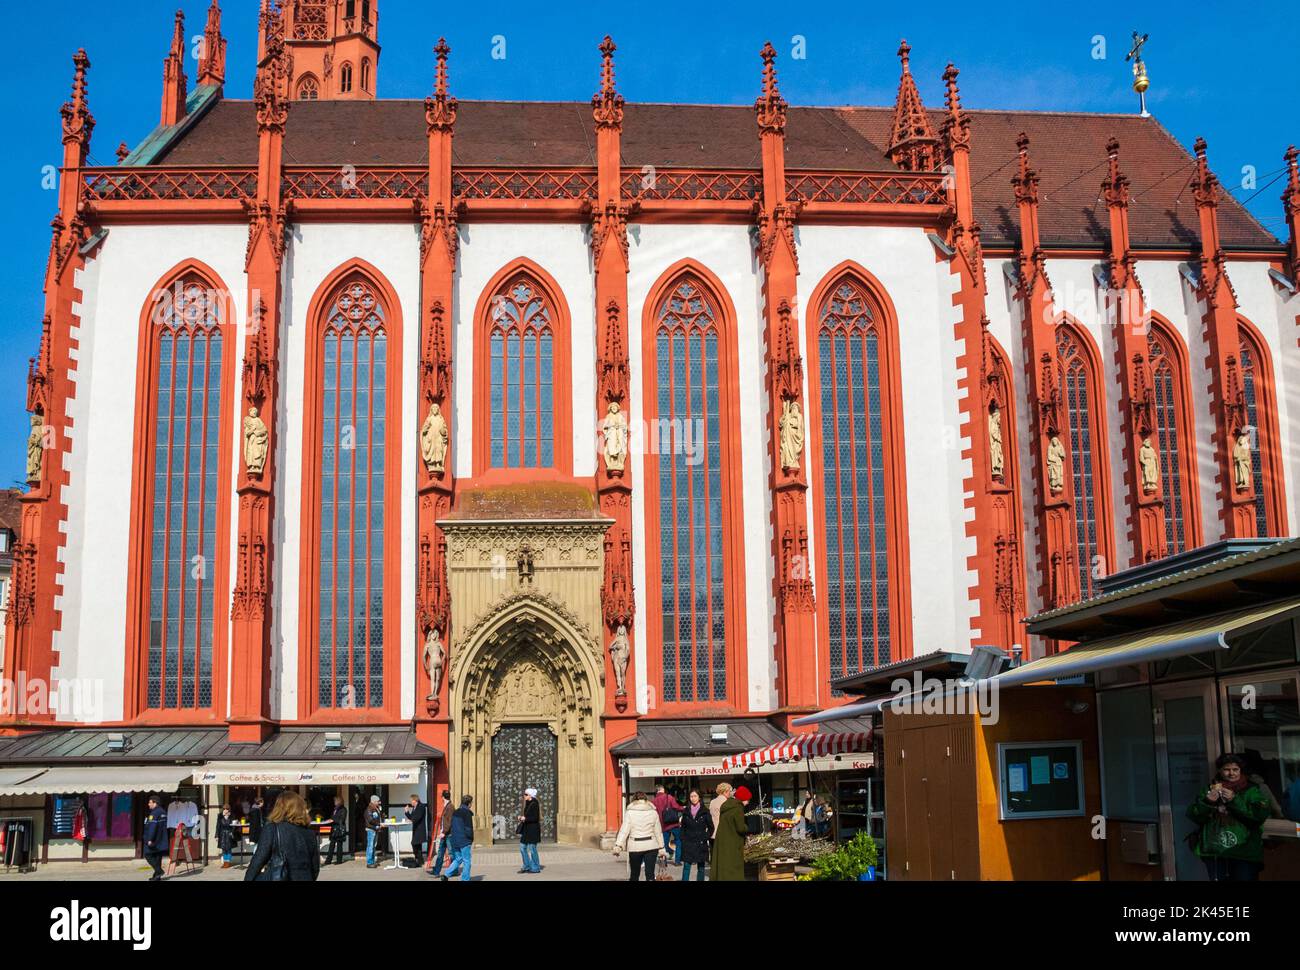 Close-up view of the southern facade with the portal called Brautpforte of the church Marienkapelle in the market square of Würzburg, Germany. The... Stock Photo